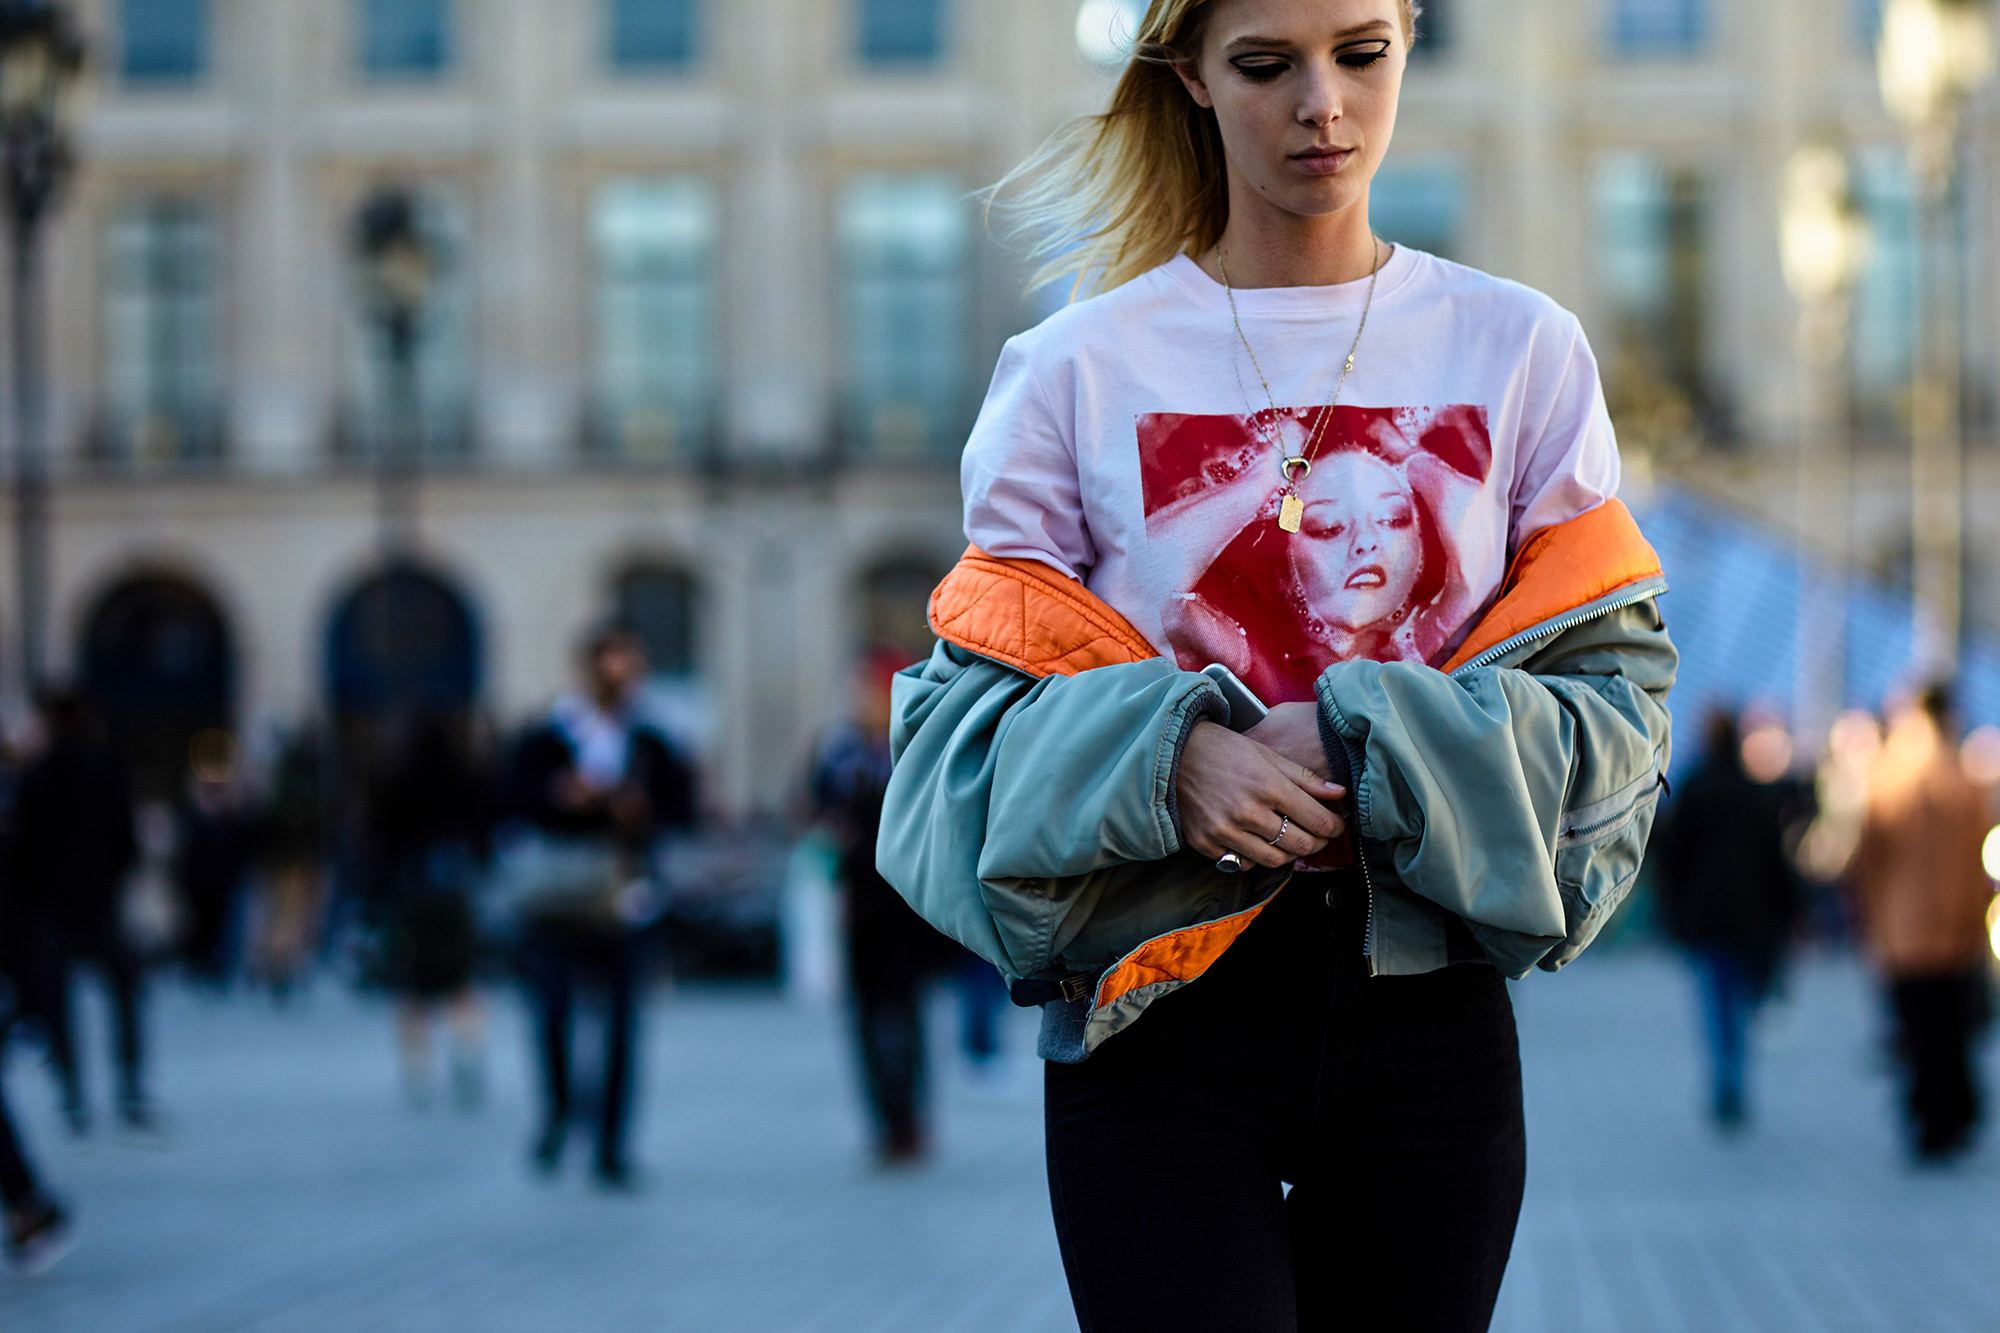 PFW Spring-Summer 2017 street style: Model Ulrikke Hoeyer wearing a graphic tee and a green bomber jacket after the Louis Vuitton Spring 2017 fashion show